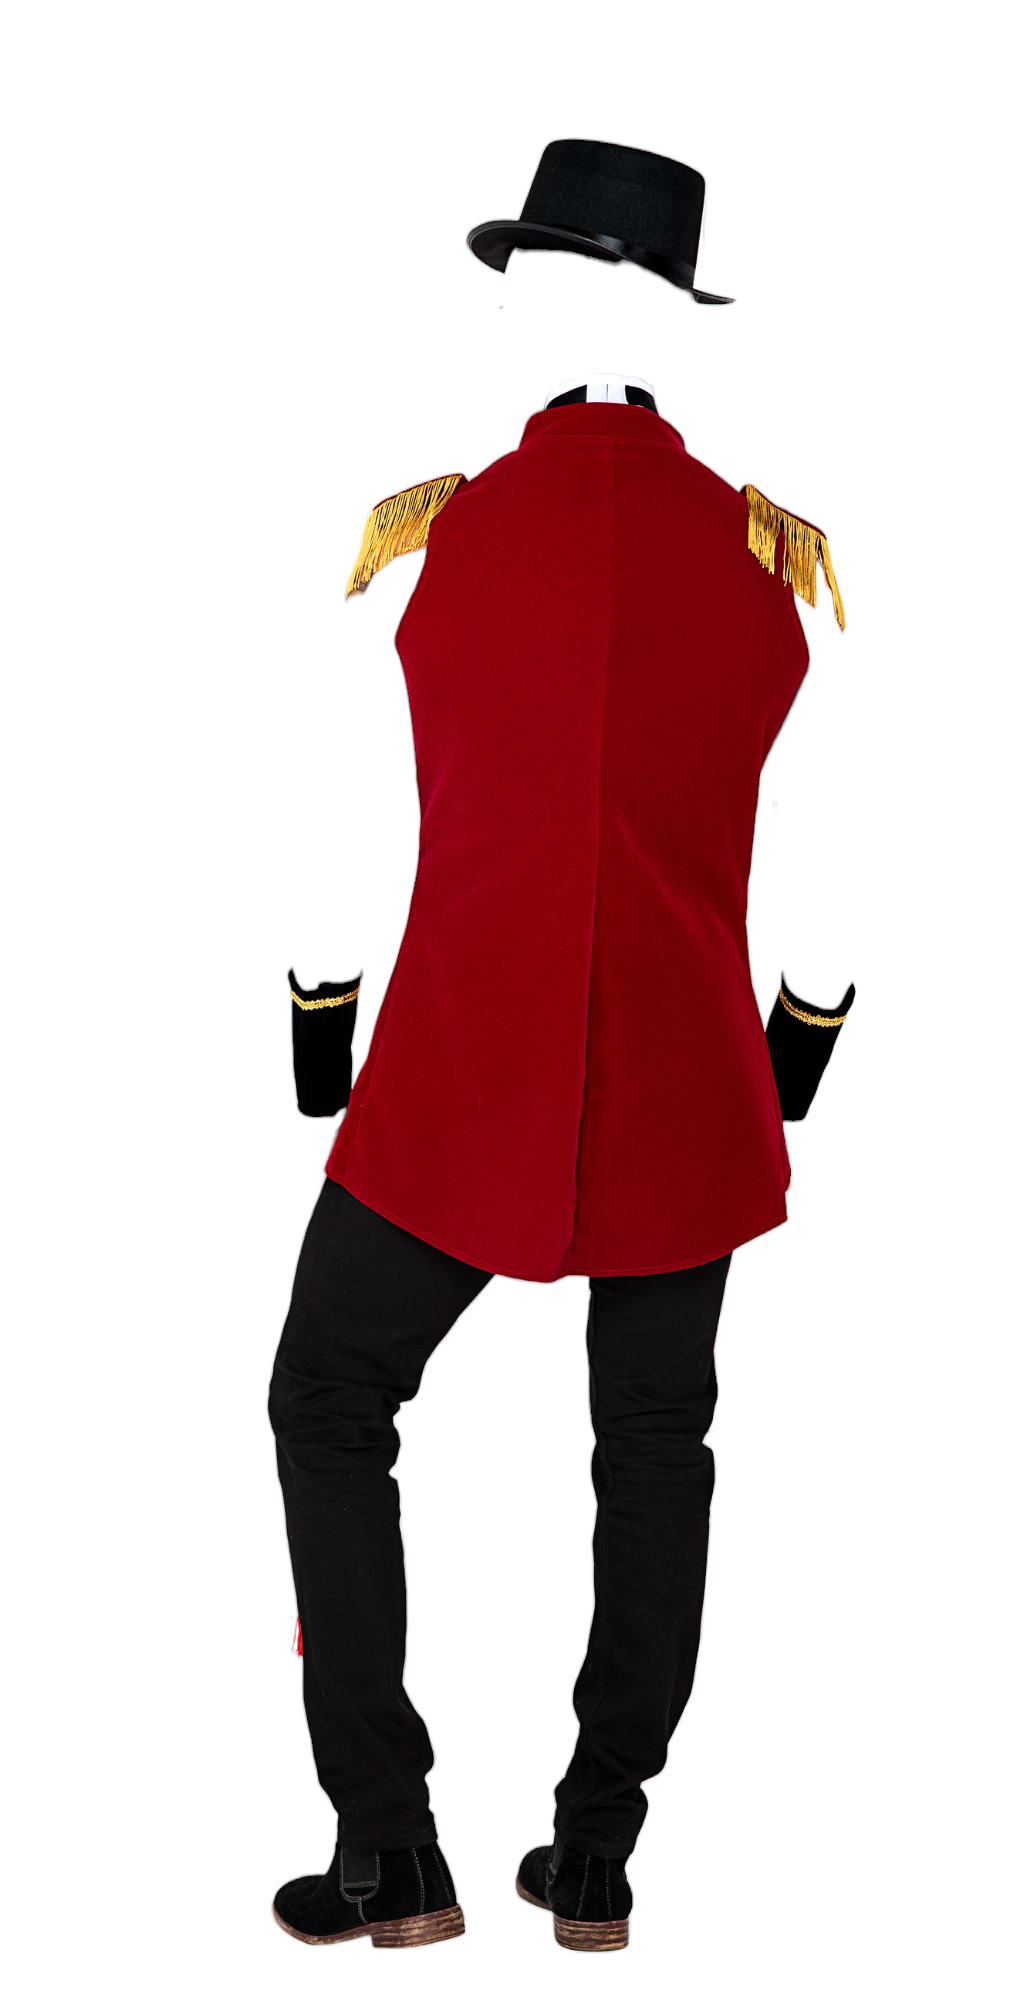 Roma Costume 4 PC Big Top Master Men's Costume with Jacket & Bowtie Black/Red/Gold